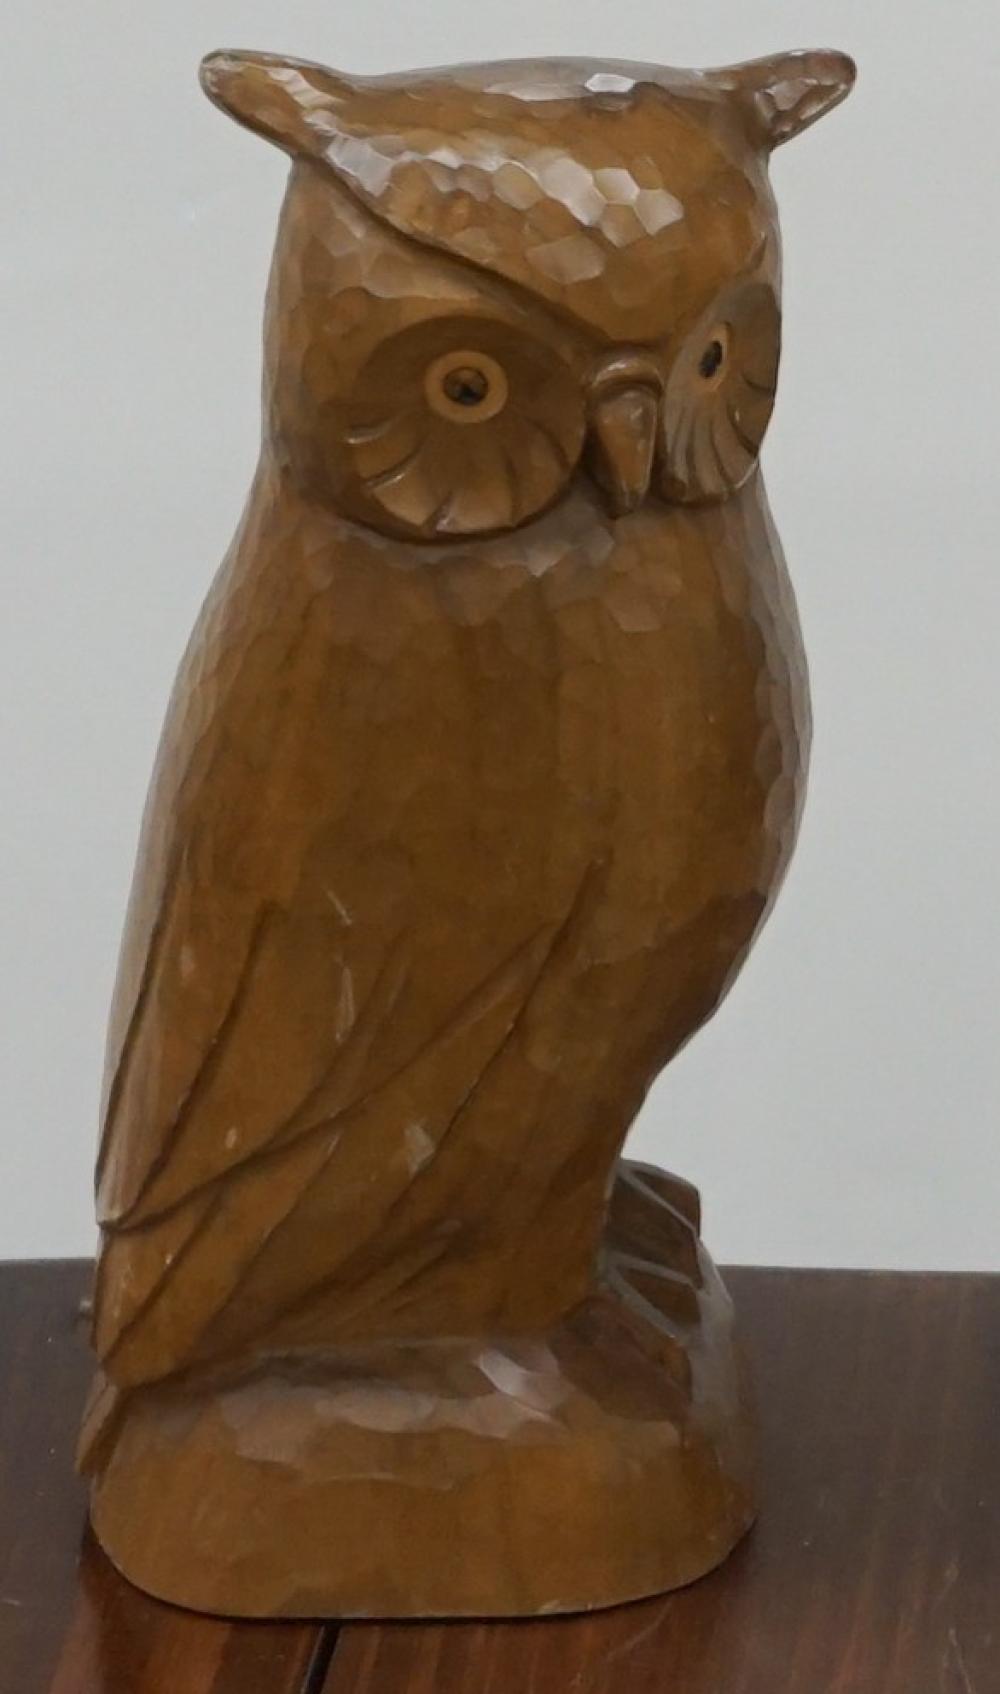 CARVED WOOD FIGURE OF AN OWL, H: 11